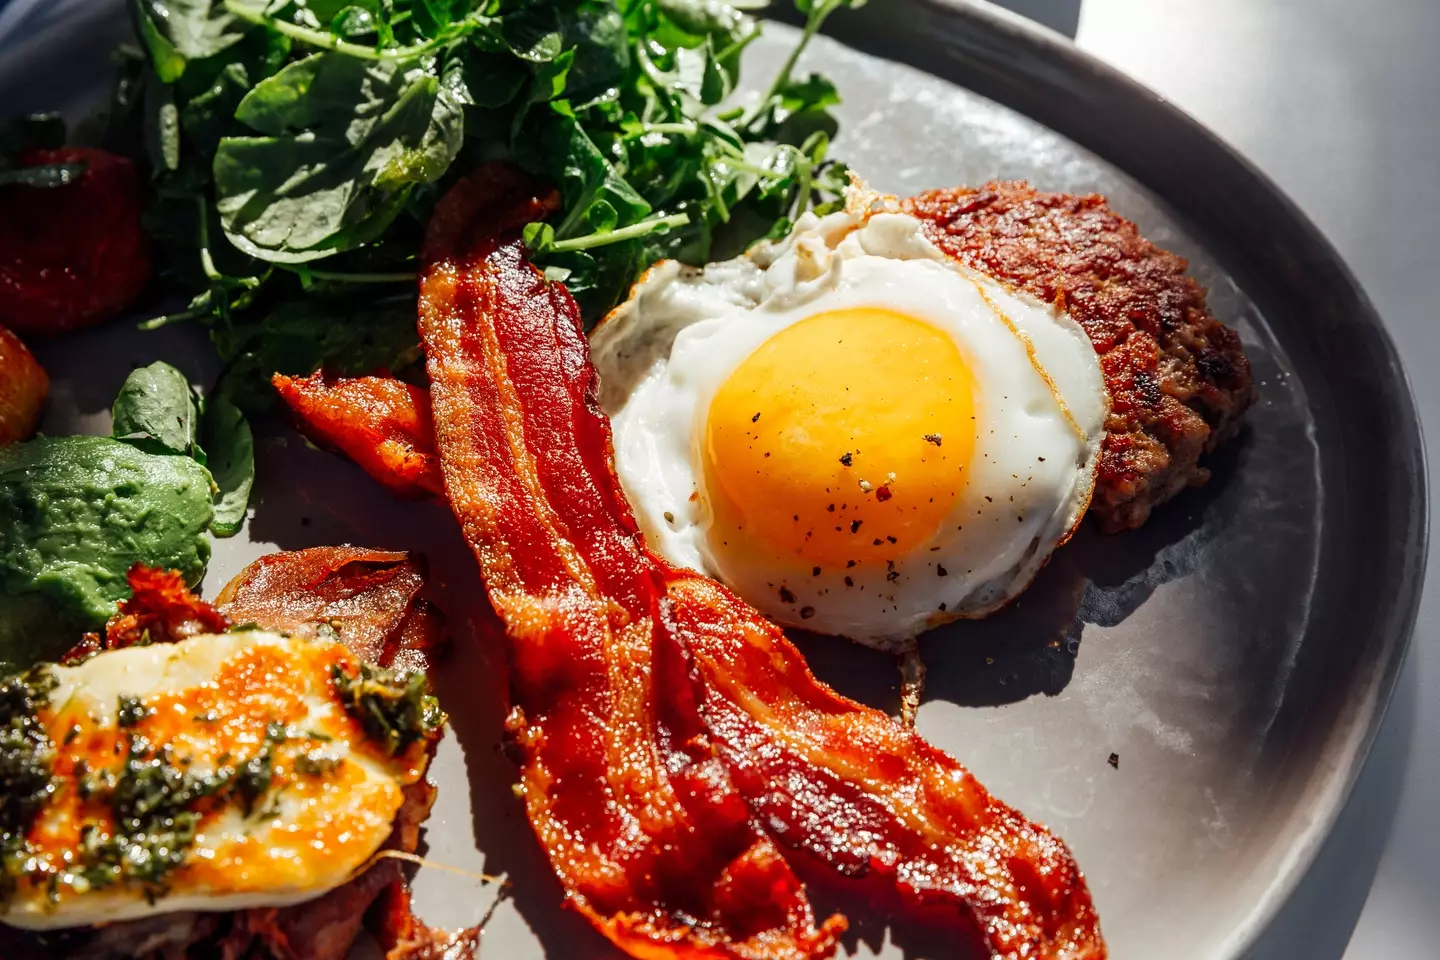 You shouldn't miss breakfast for this good reason.